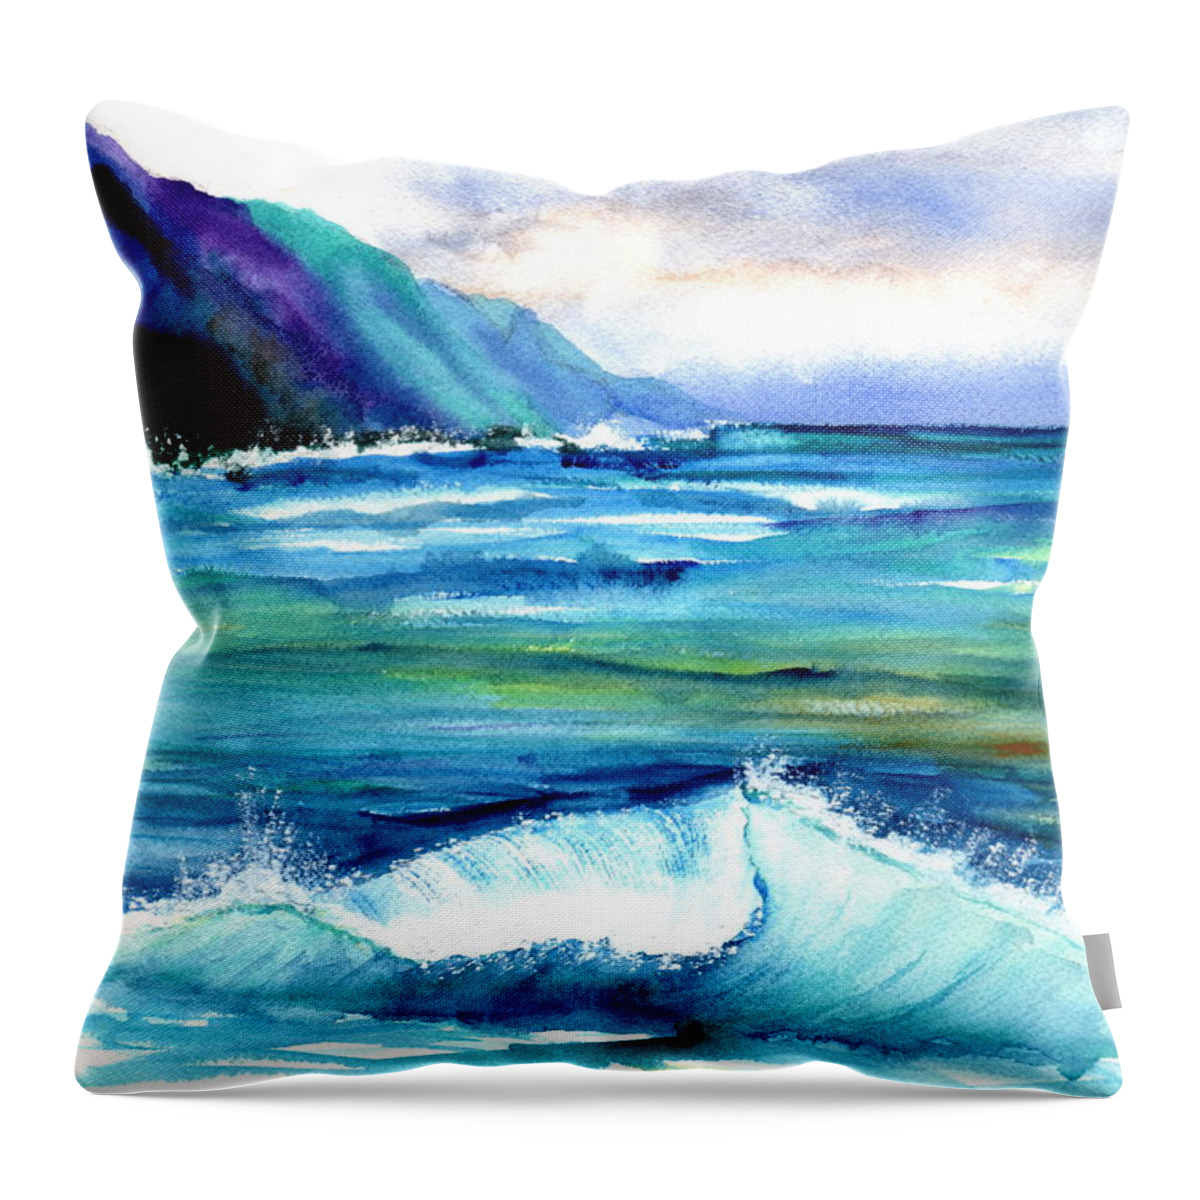 Hanalei Throw Pillow featuring the painting Hanalei Sea by Marionette Taboniar